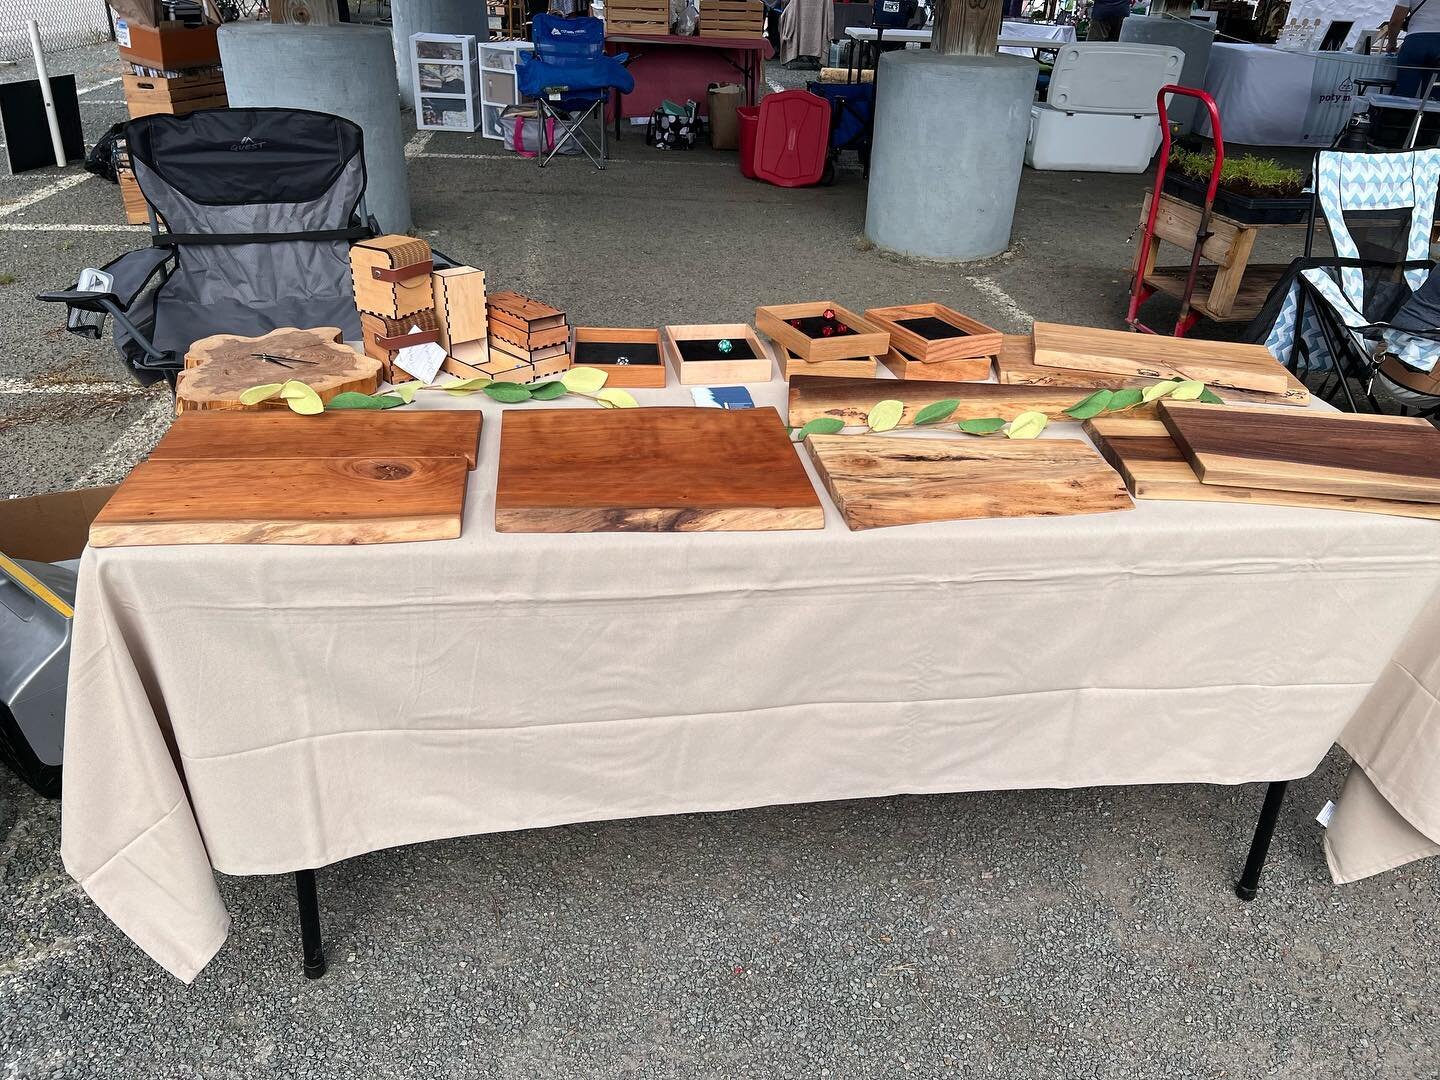 Come see Maddie at Lakeside Marker&rsquo;s Market to get your mom&rsquo;s charcuterie board for Mother&rsquo;s Day! 

@lakesidemarketrva